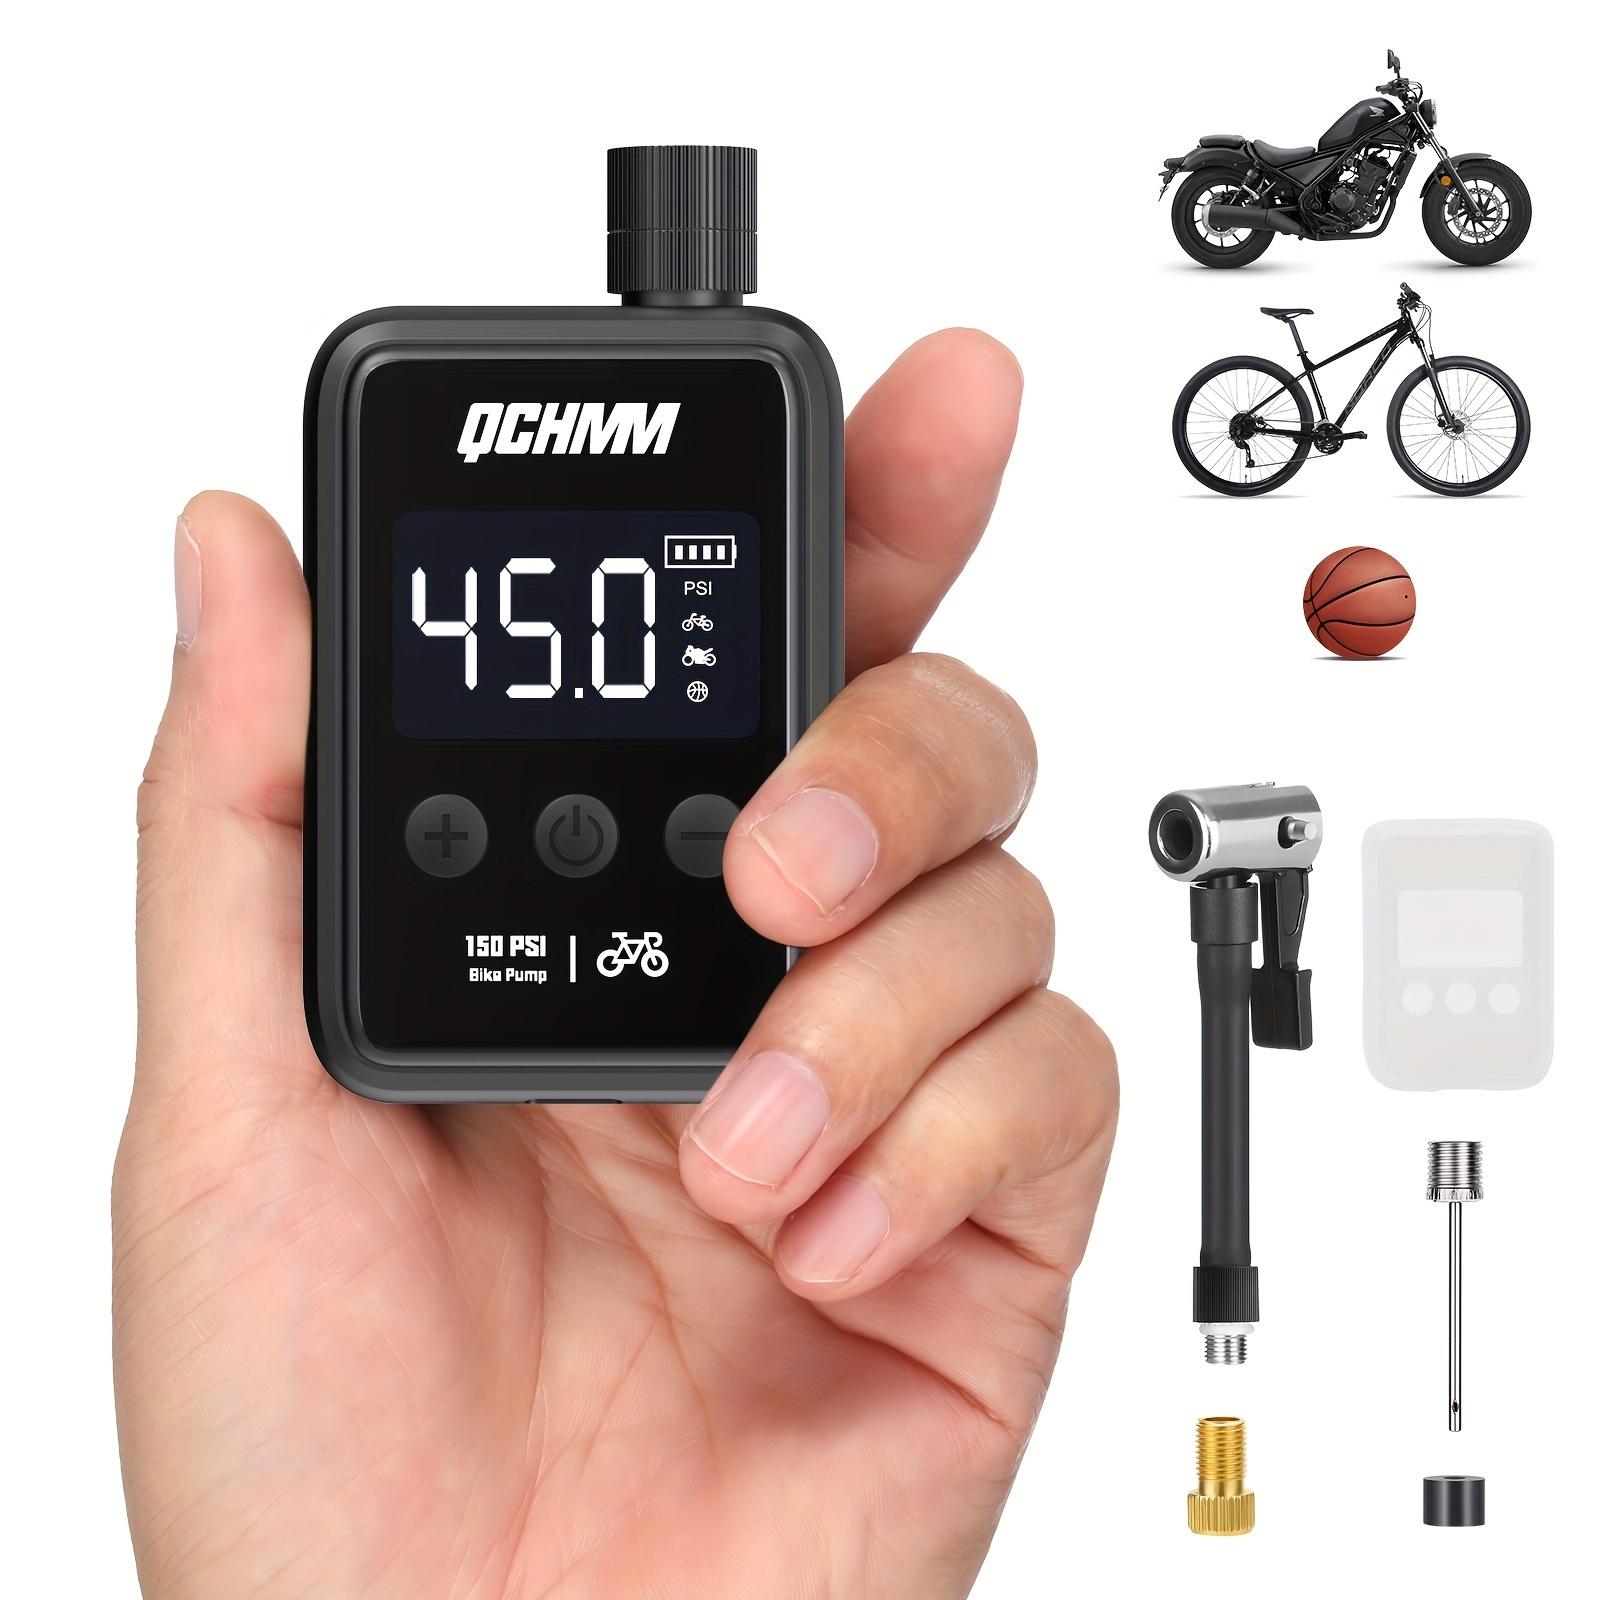 

Mini Bicycle Pump, Electric Bike Pump With Digital Lcd Pressure Gauge, Ultra Small 150 Psi Bicycle Air Pump, 500 Mah, Type-c Rechargeable Battery Mini Pumps For All Bikes